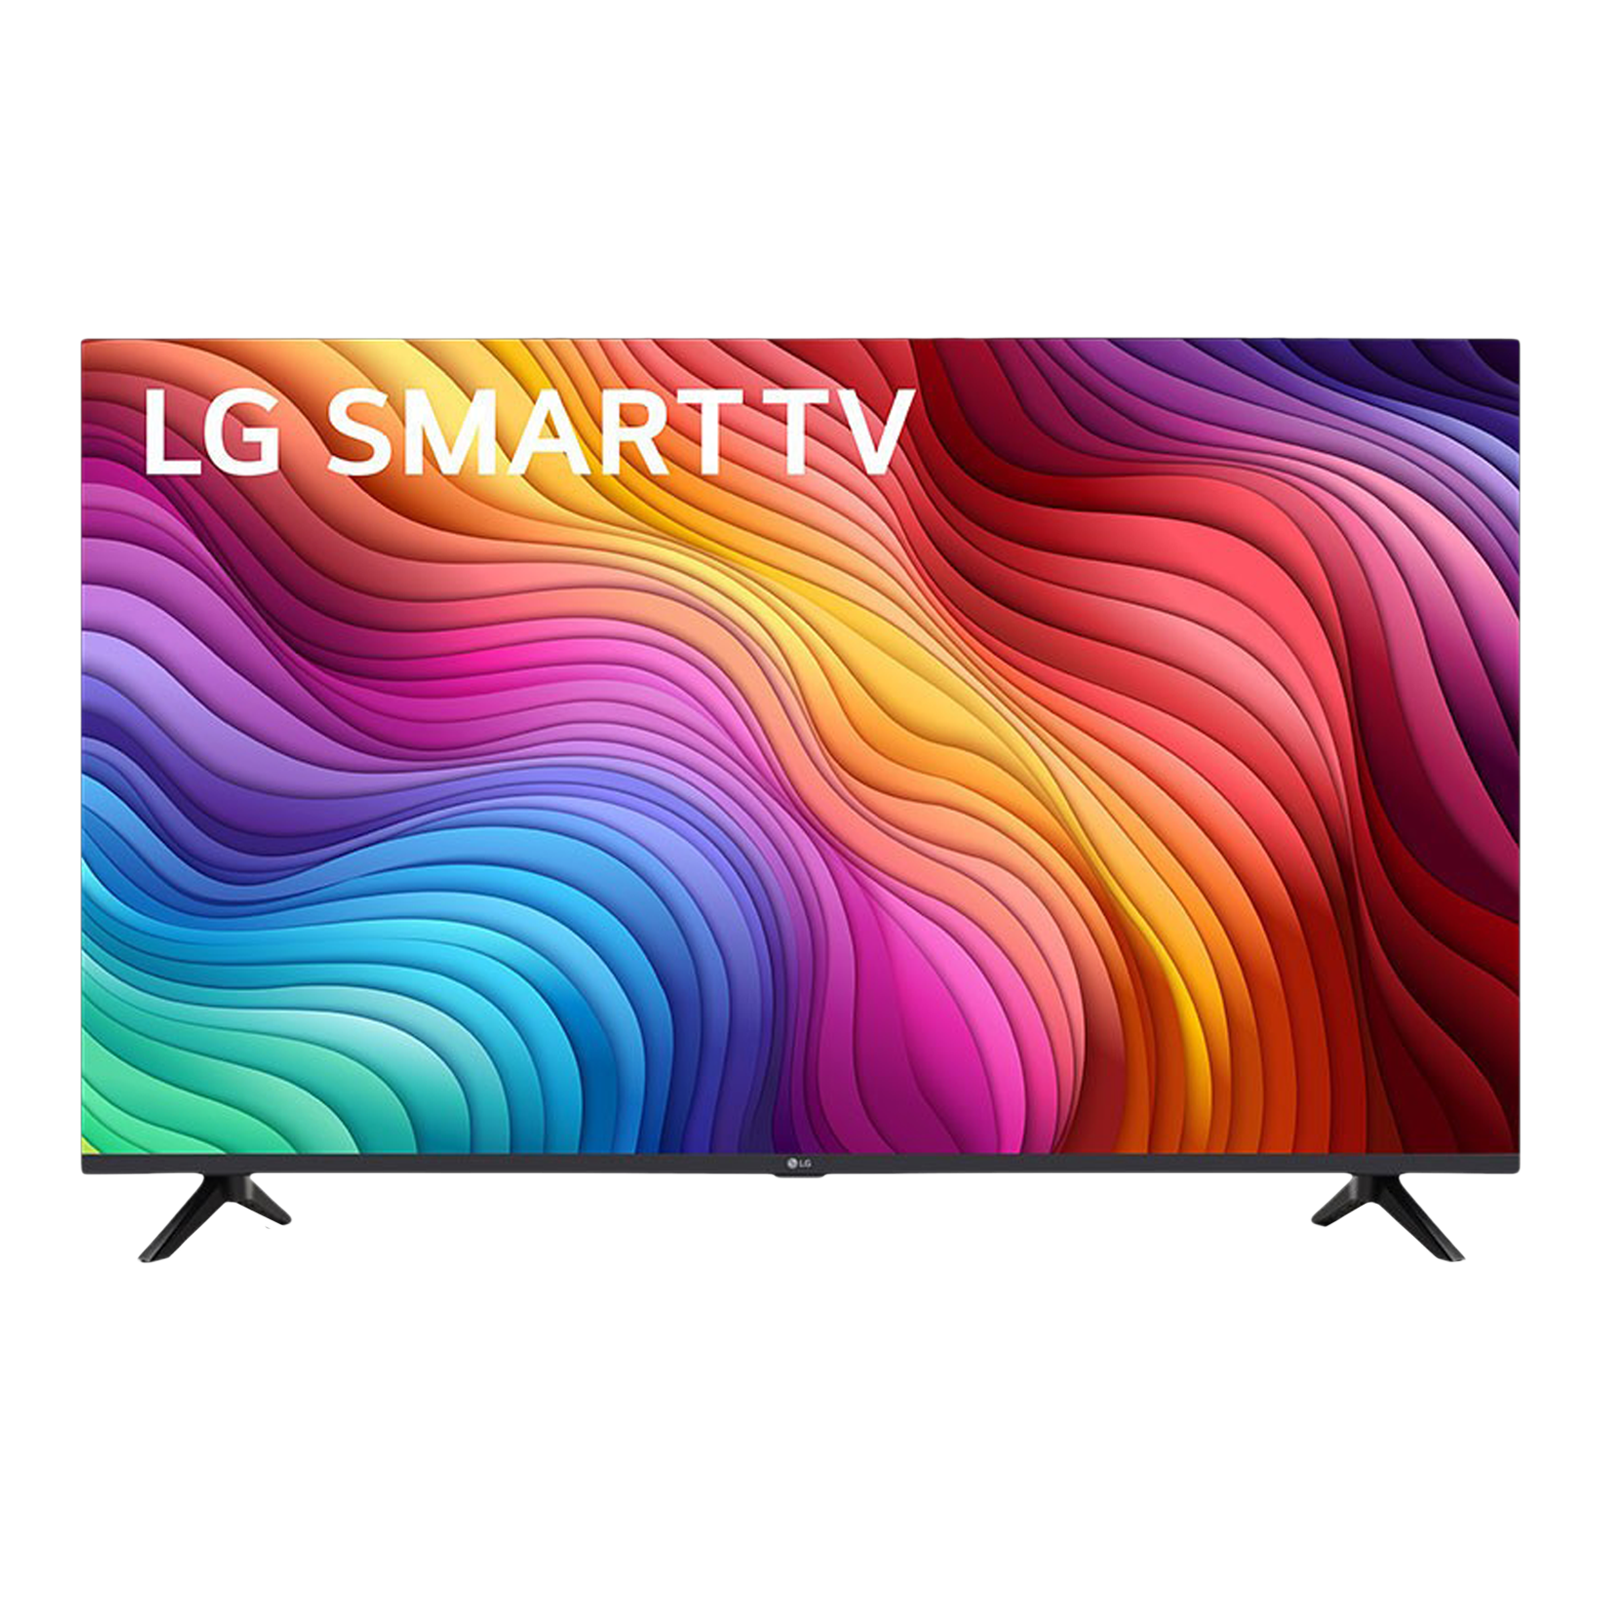 LG LQ64 80 cm (32 inch) HD Ready LED Smart WebOS TV with Active HDR